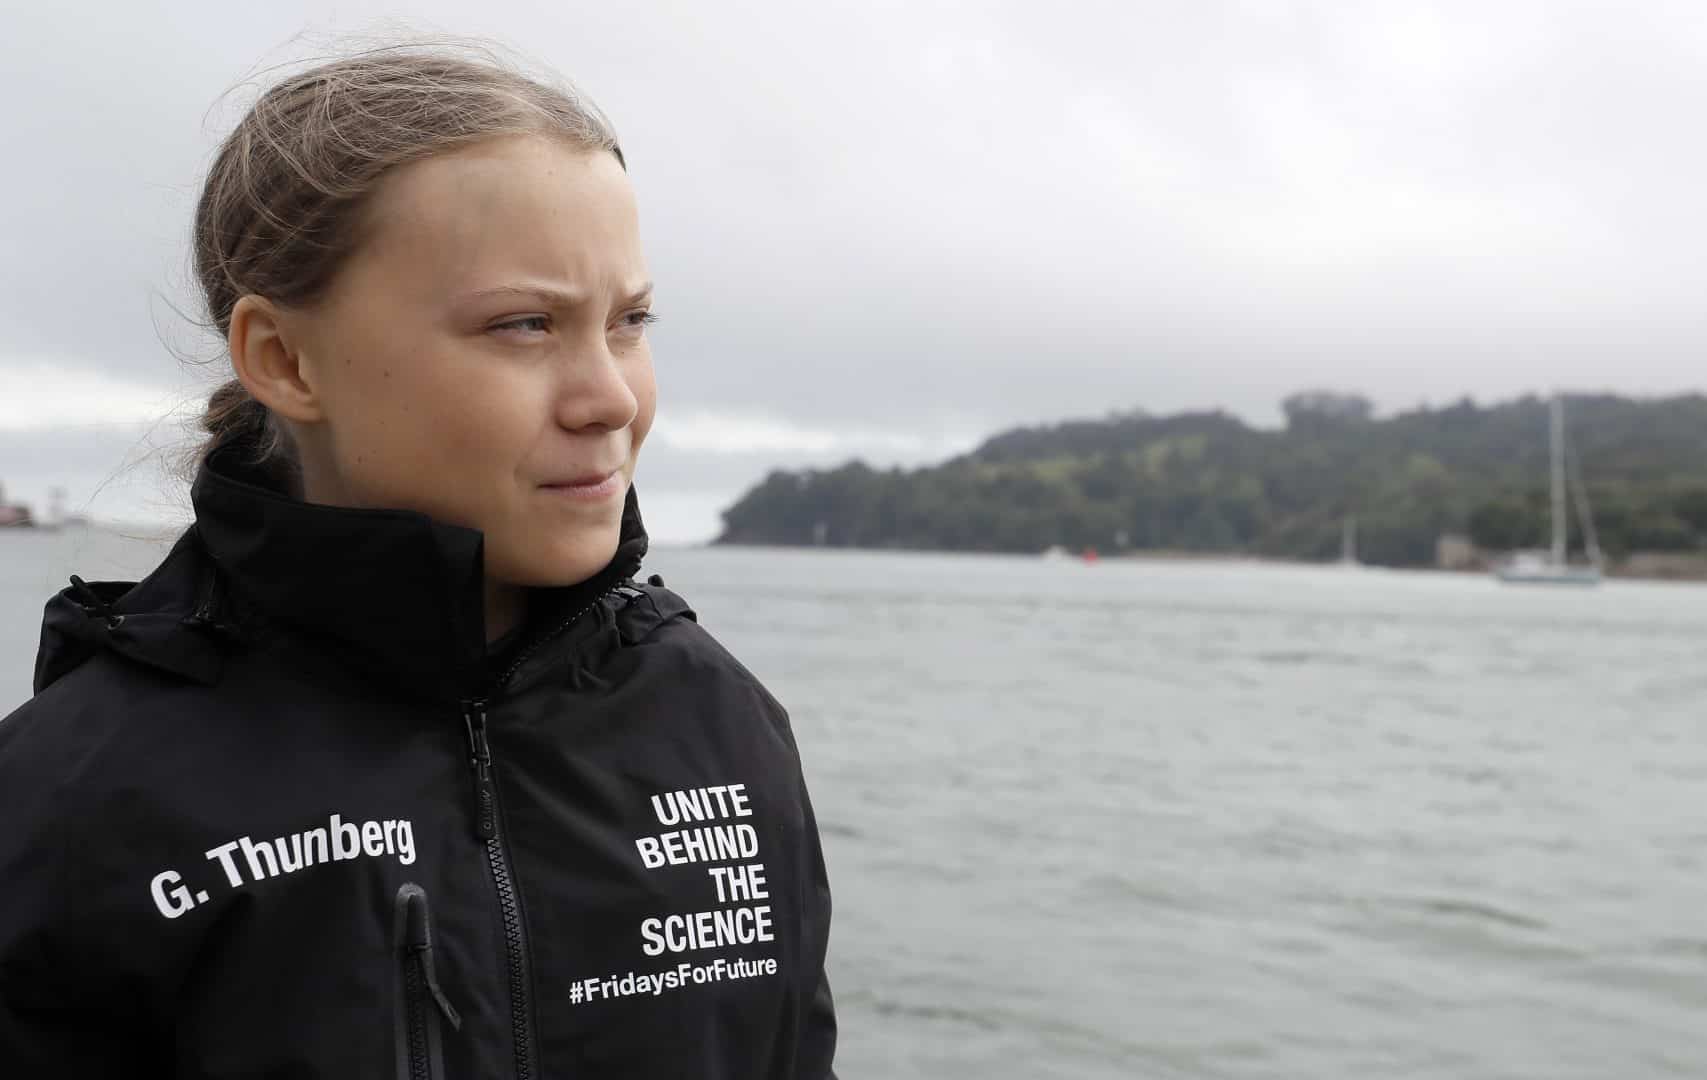 Greta Thunberg responds to graphic sticker linked to oilfield company that appears to depict her being sexually assaulted